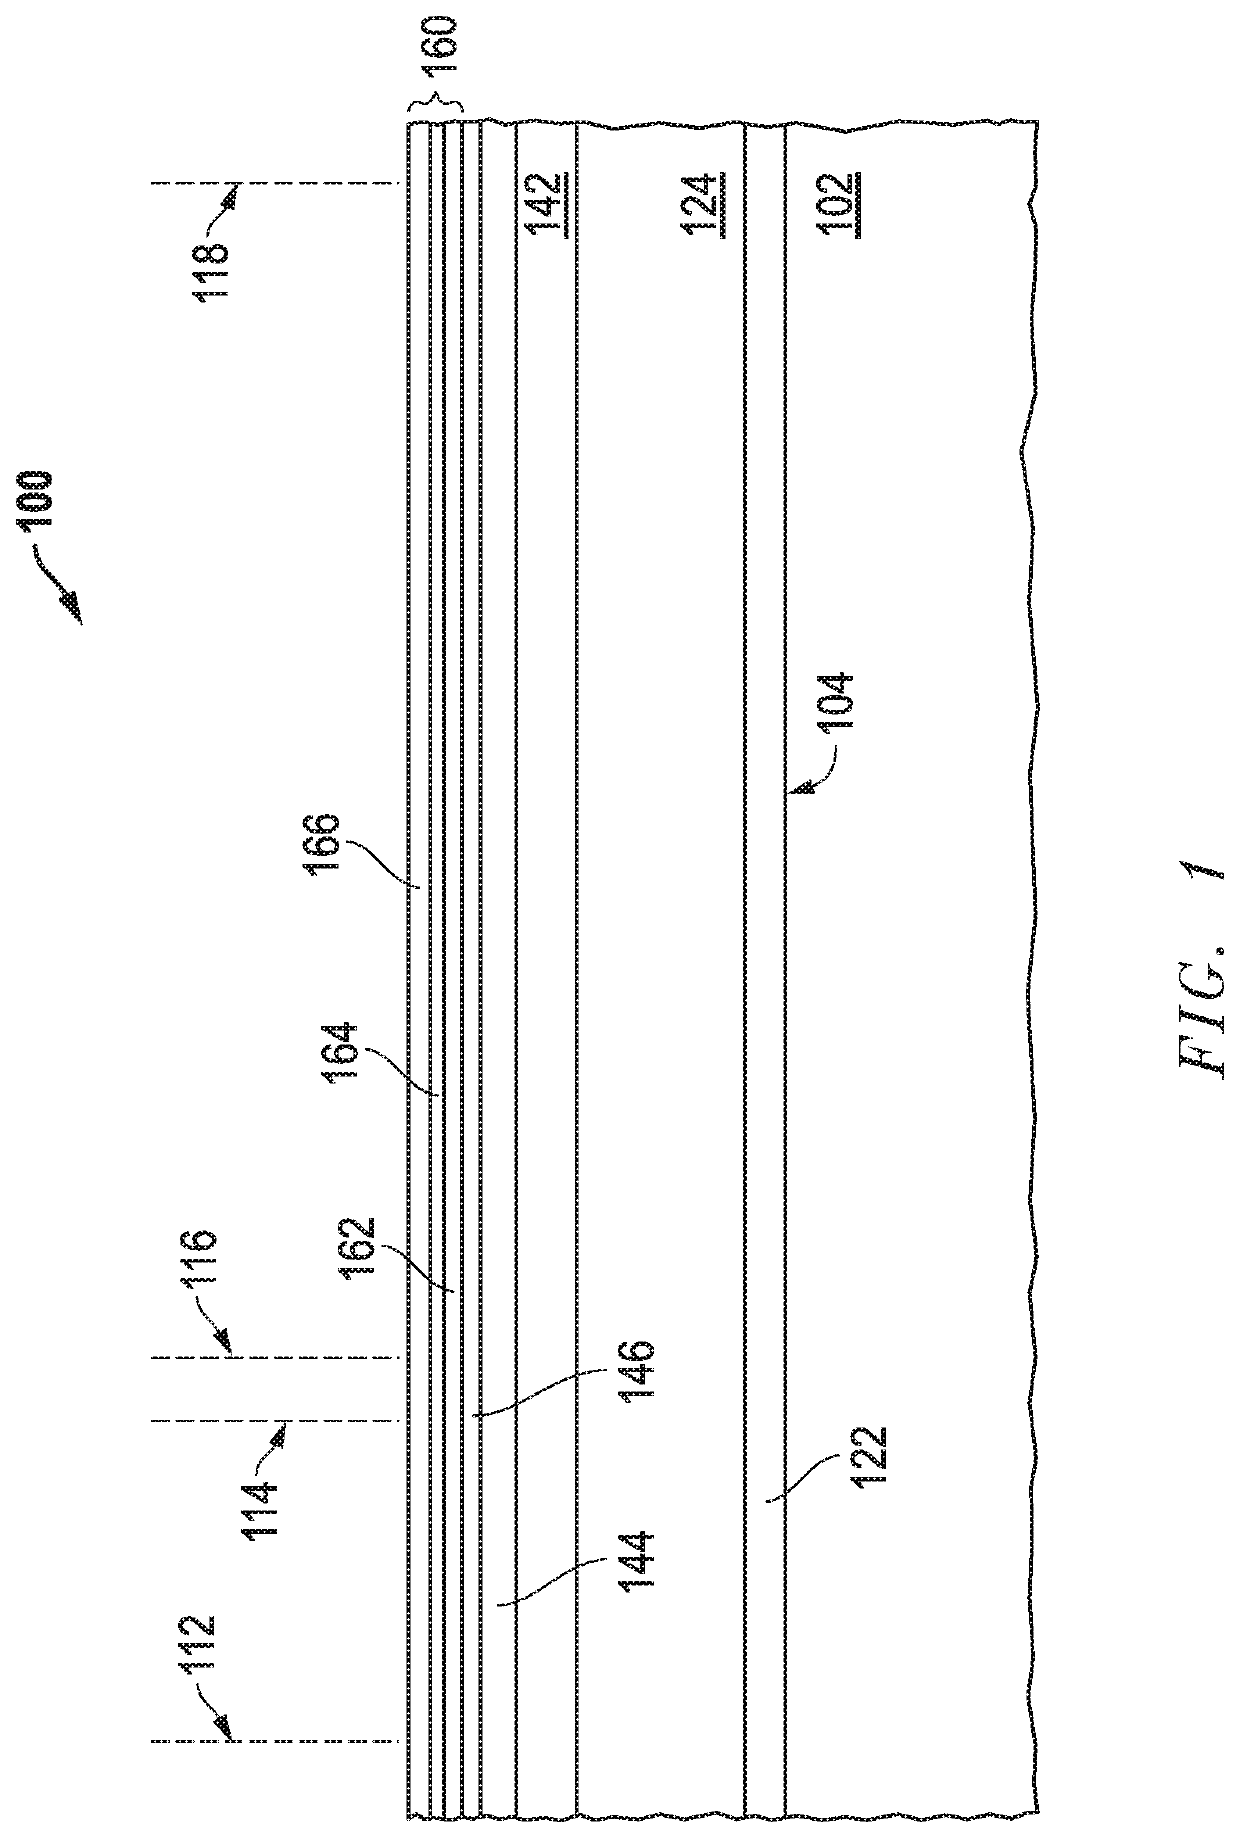 Process of forming an electronic device including a transistor structure